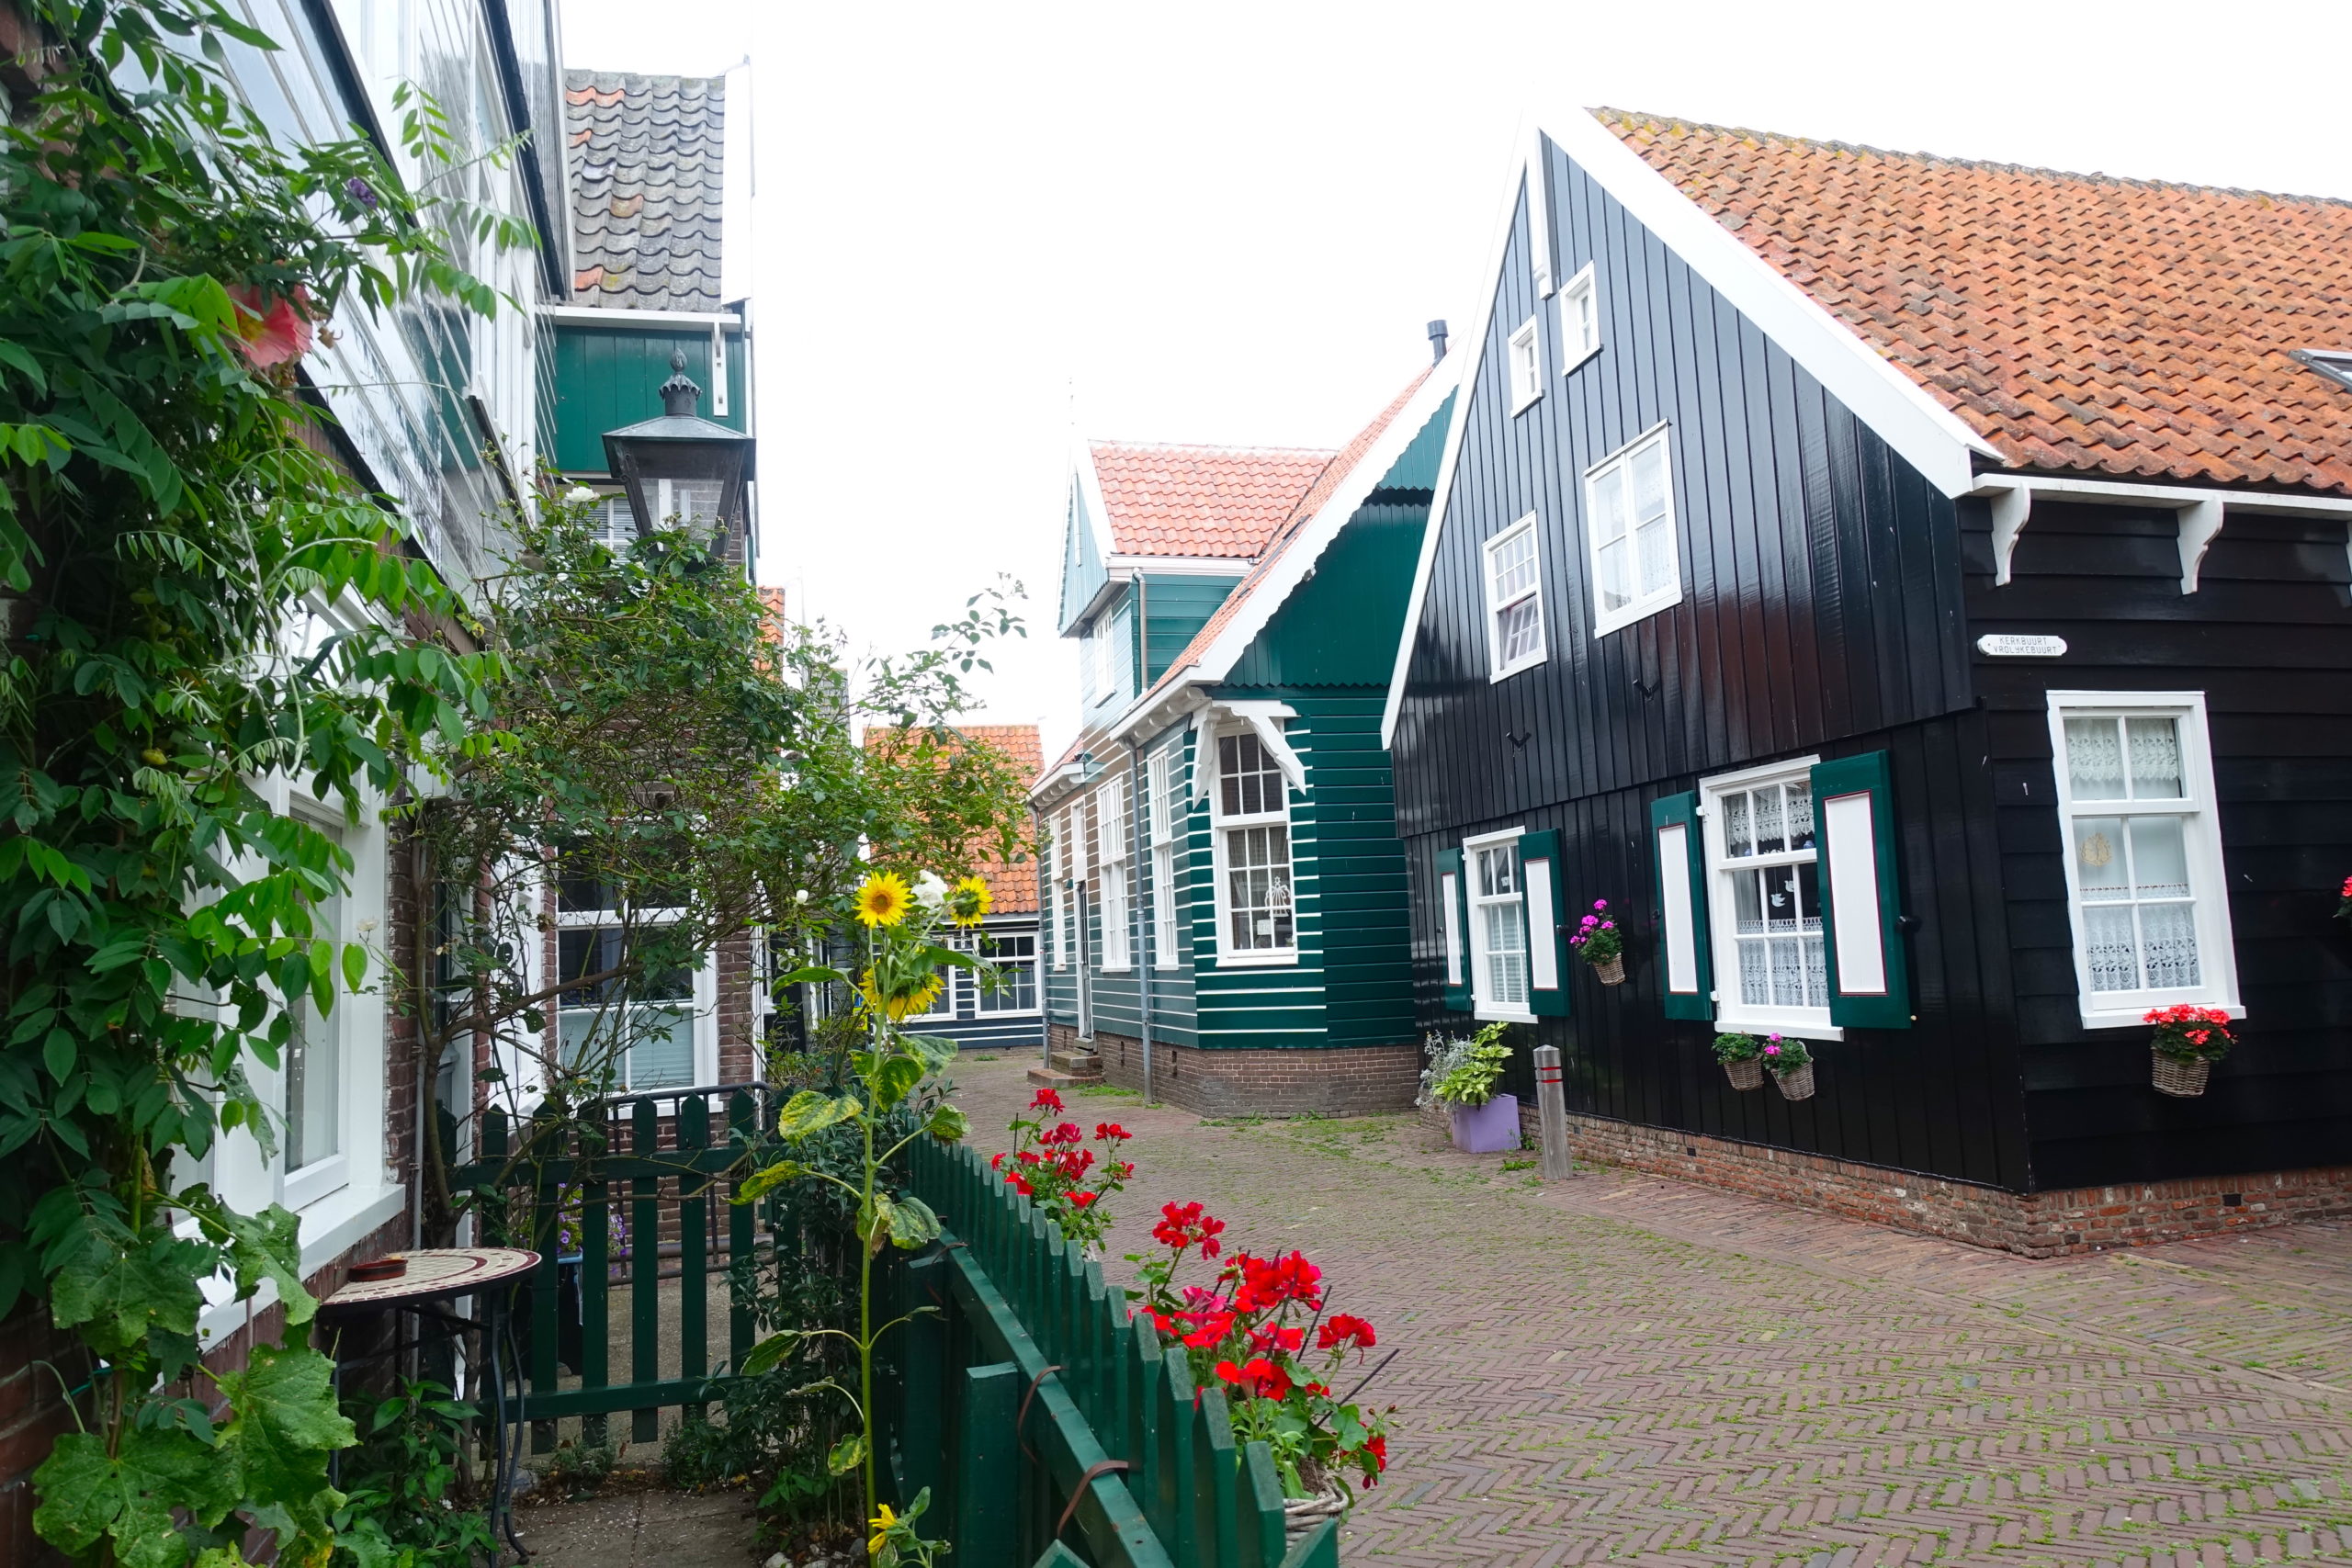 Center street in Marken with red flowers and green wooden houses 